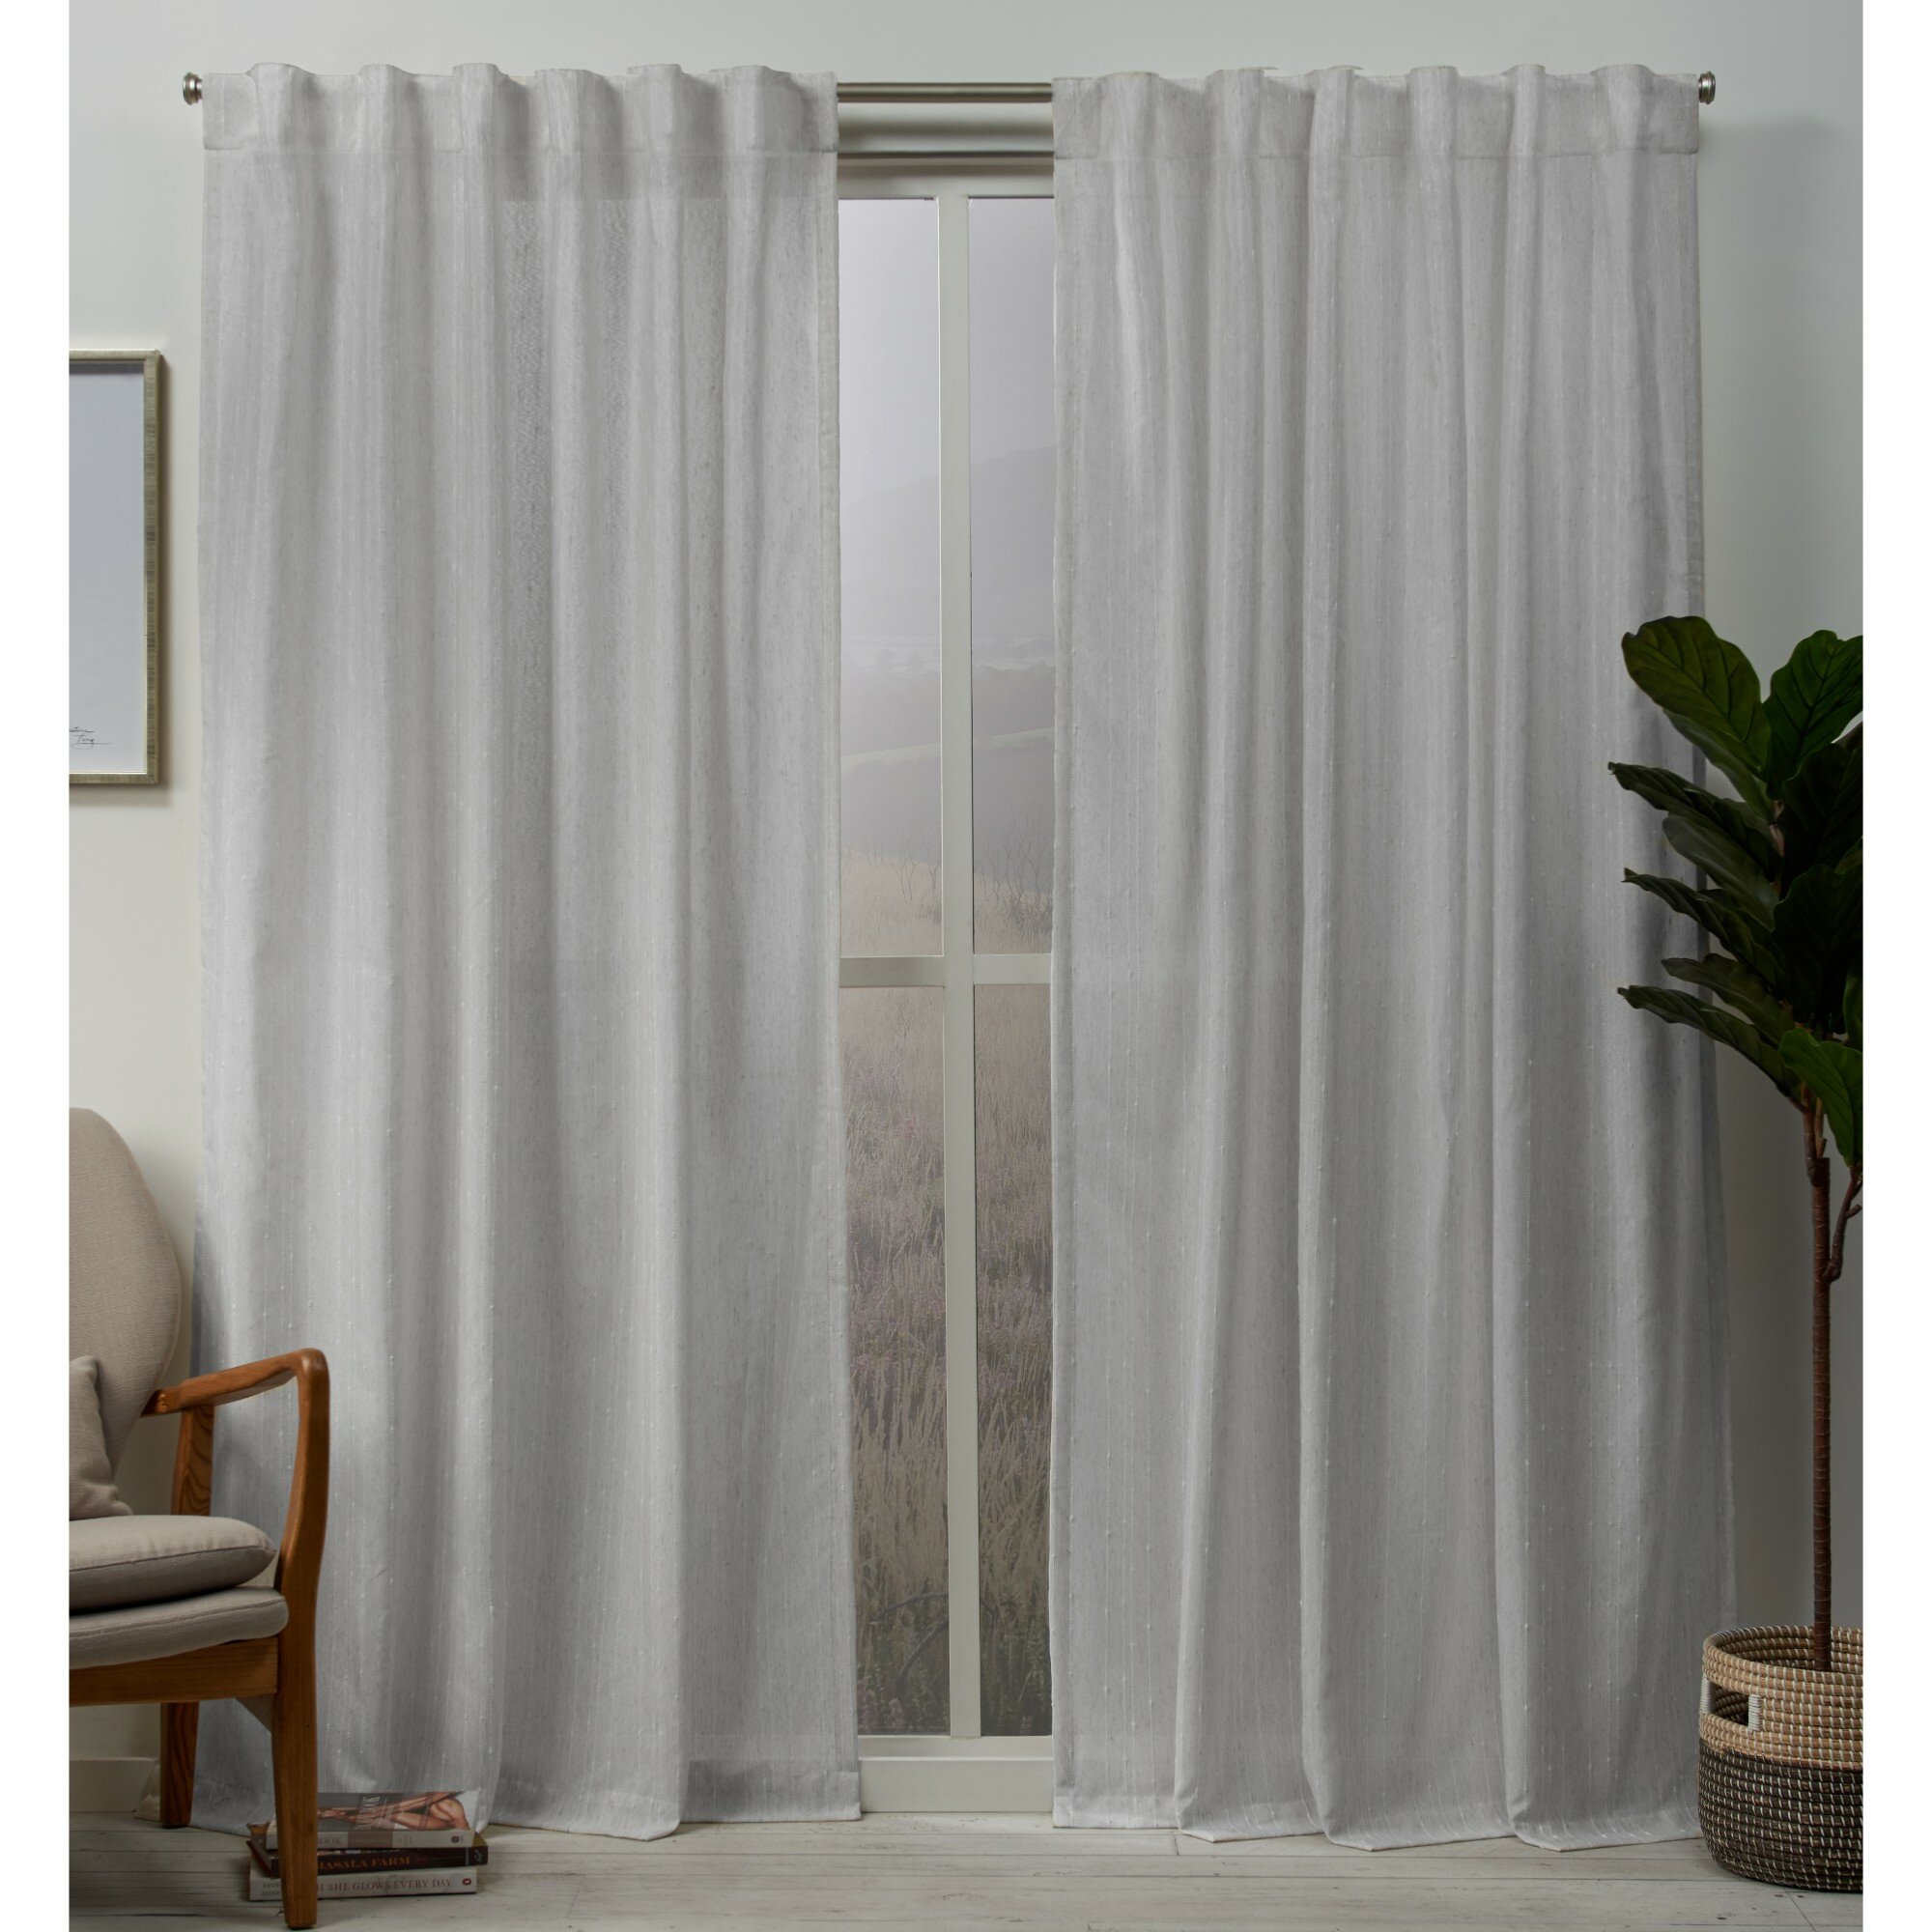 Modern Gray Solid Color Blackout Curtains Window Treatment Balcony Home Decor 